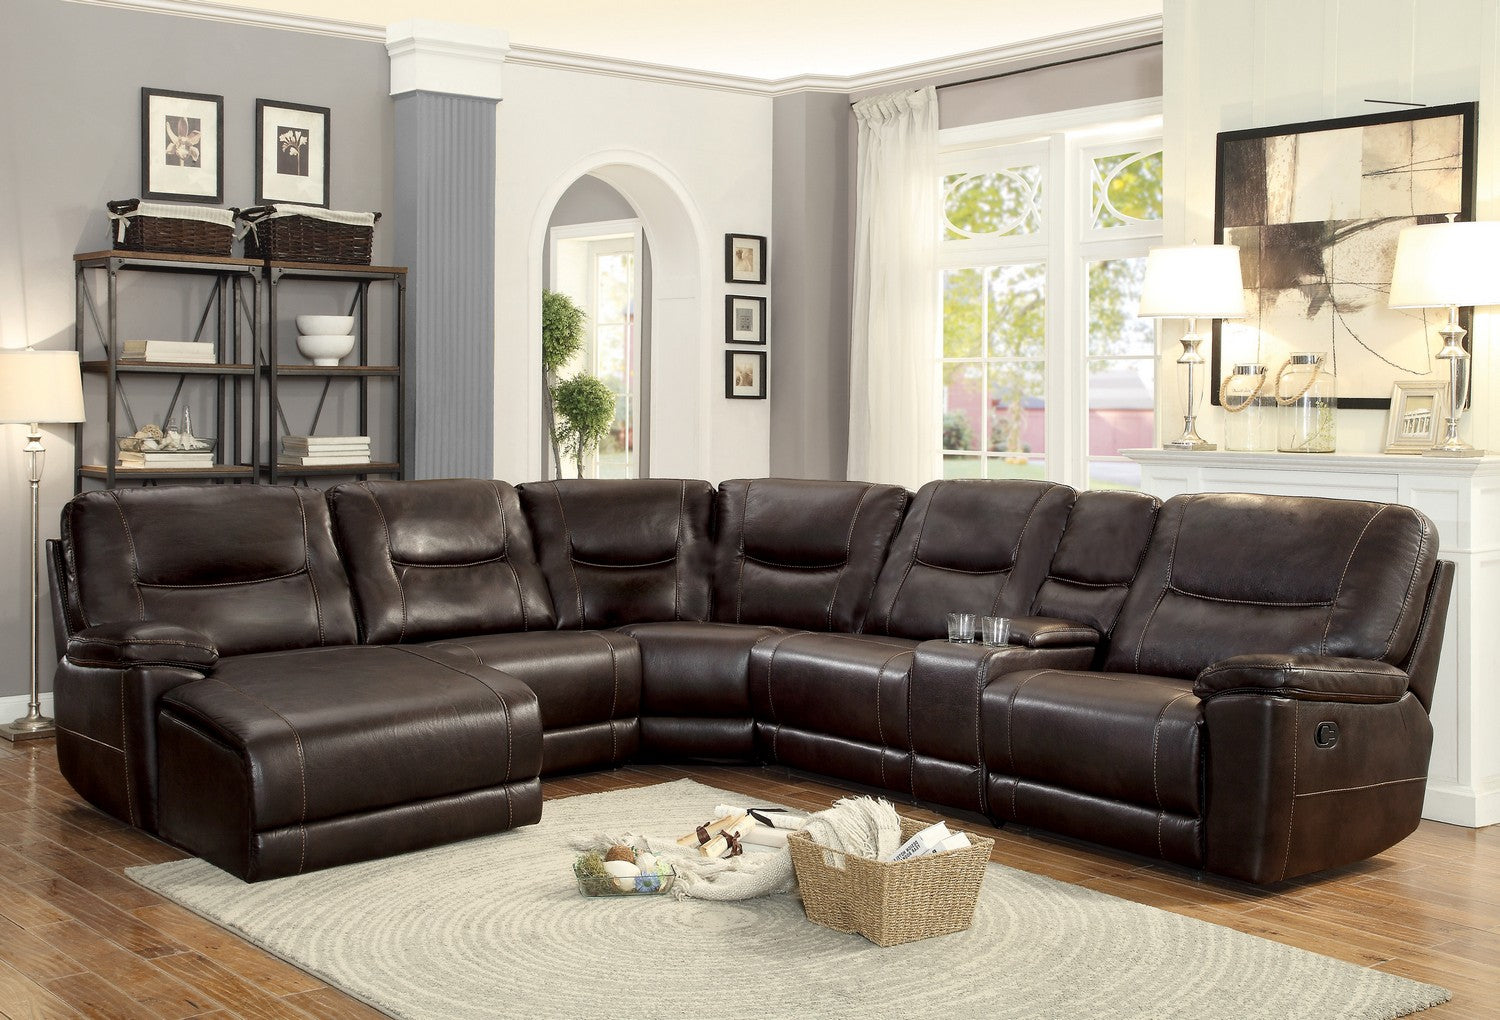 camel brown leather 3 piece sectional sofa sierra